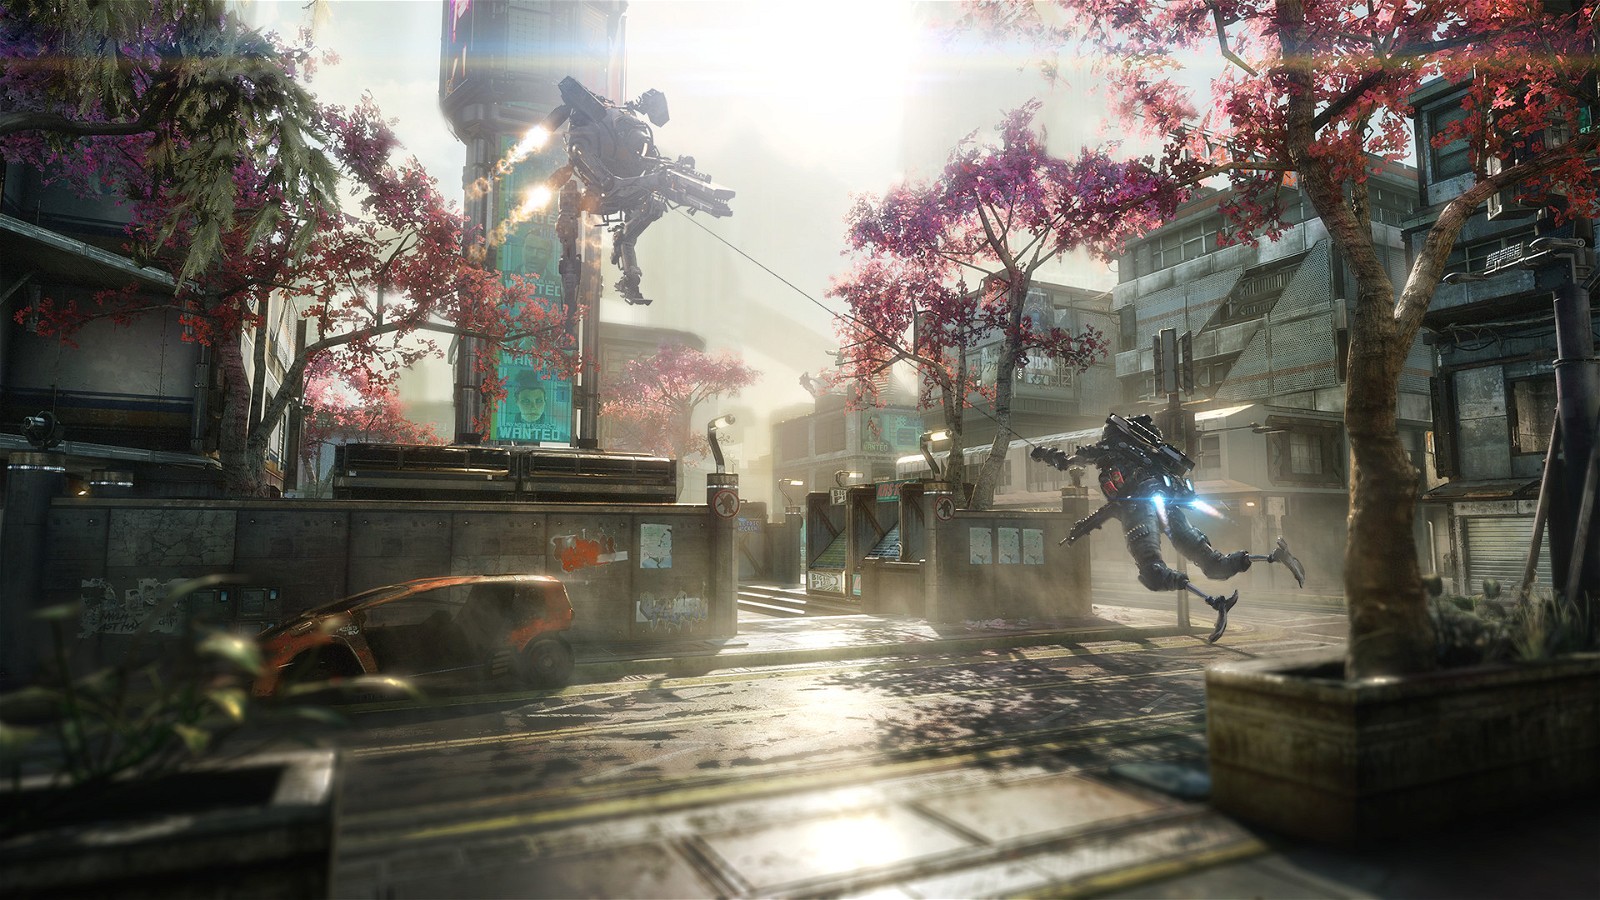 Titanfall 2 flirted with the idea of transforming into an MMO experience